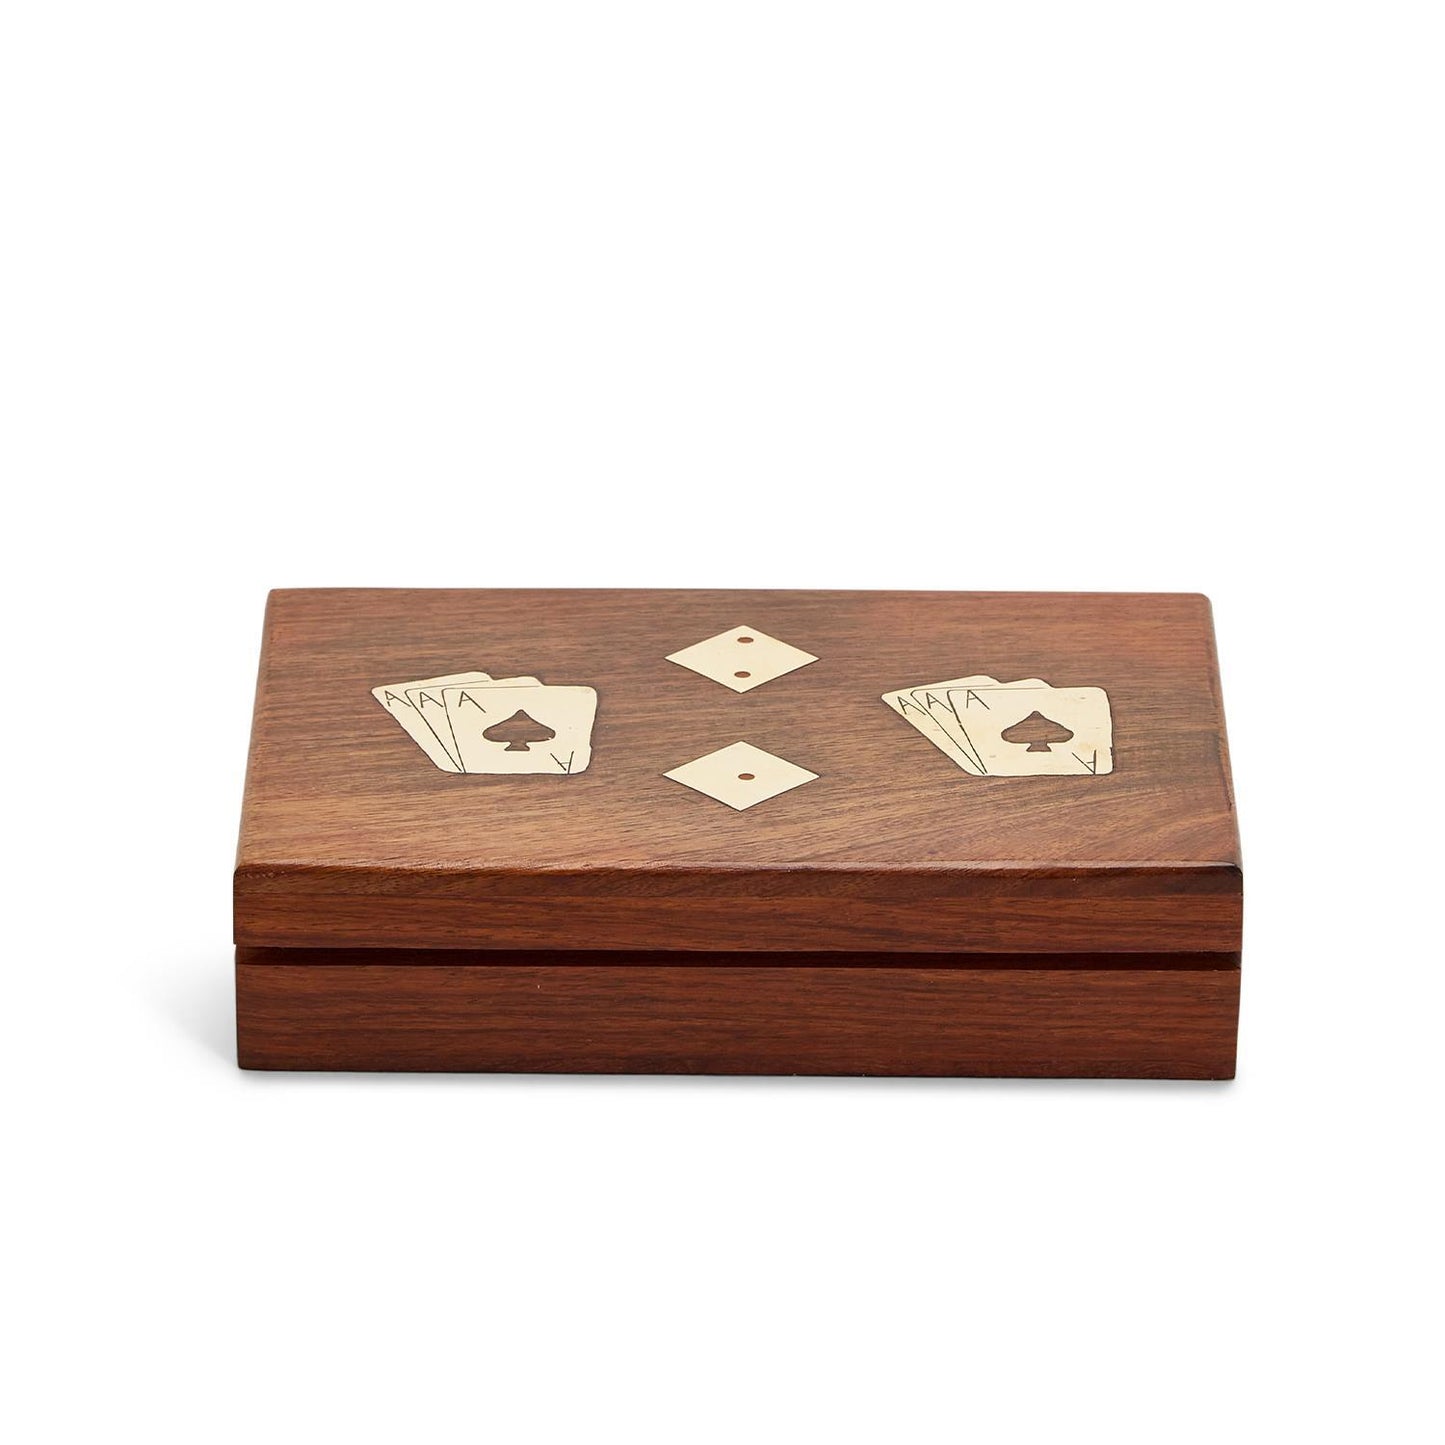 Wood Crafted Playing Cards/Dice Game Set